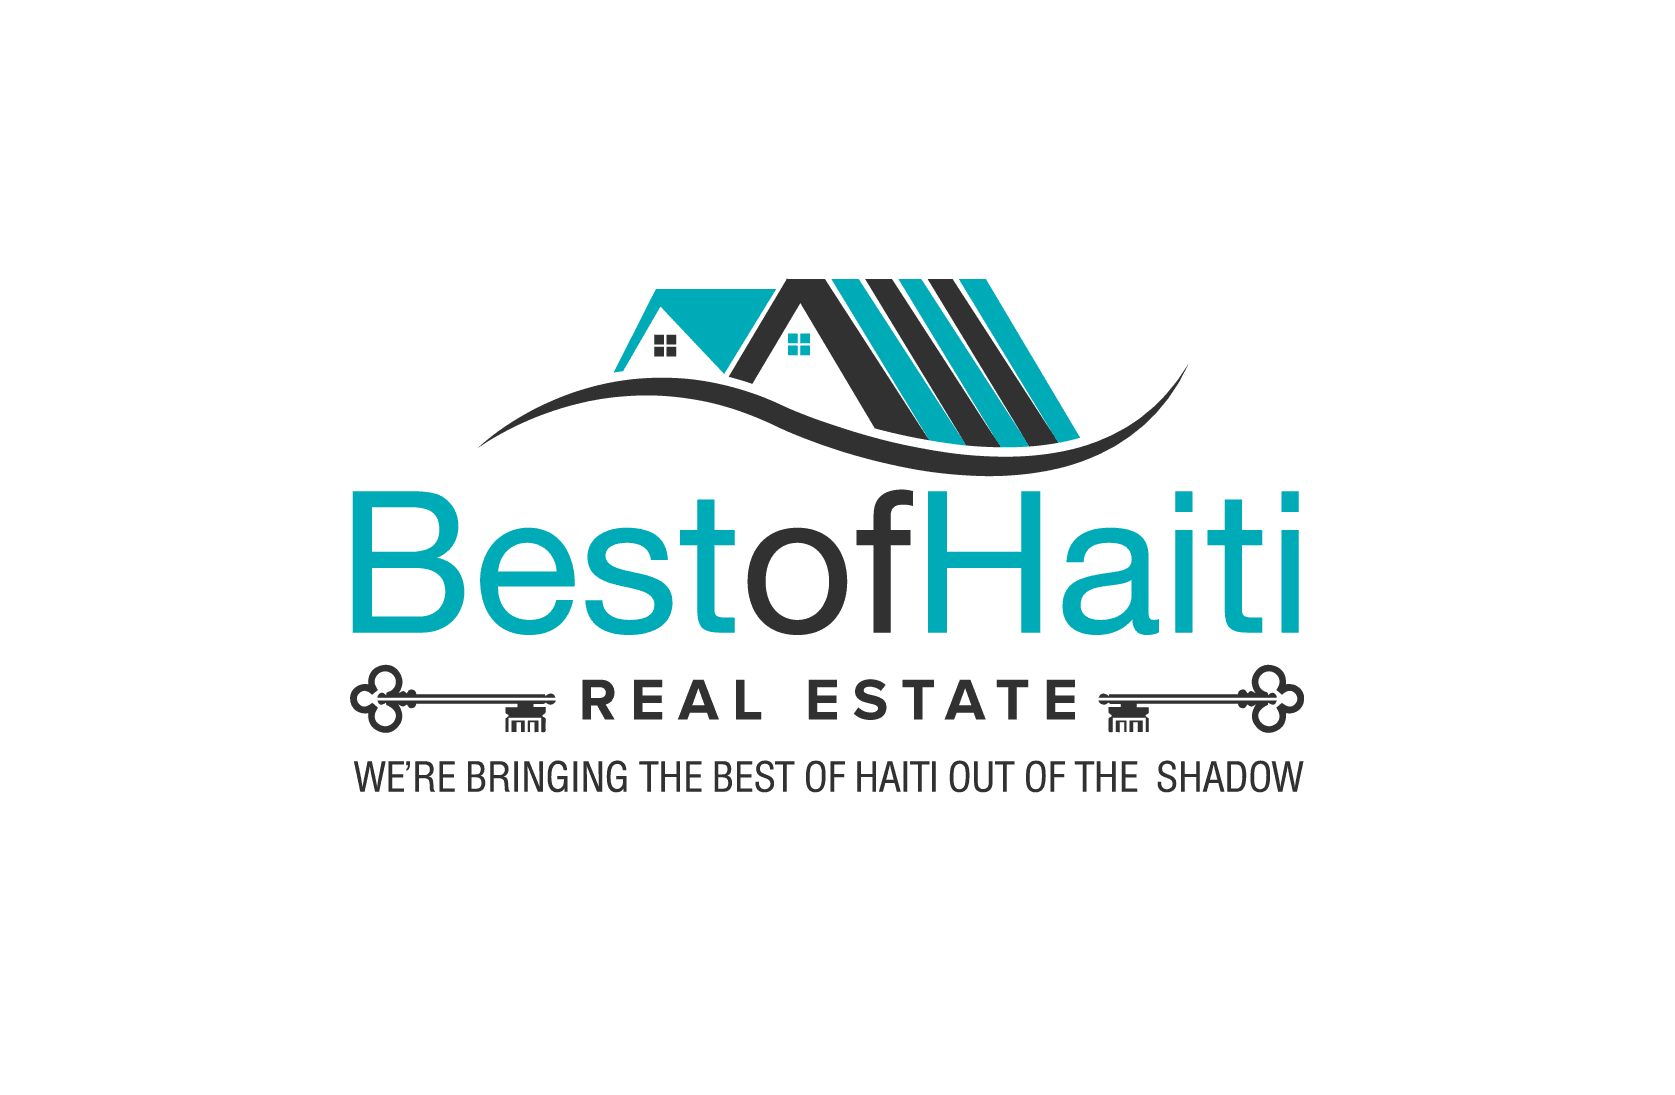 Magnificent, Move-in Ready House for Sale in Fort Jacques / Fermathe / Kenskoff, Haiti